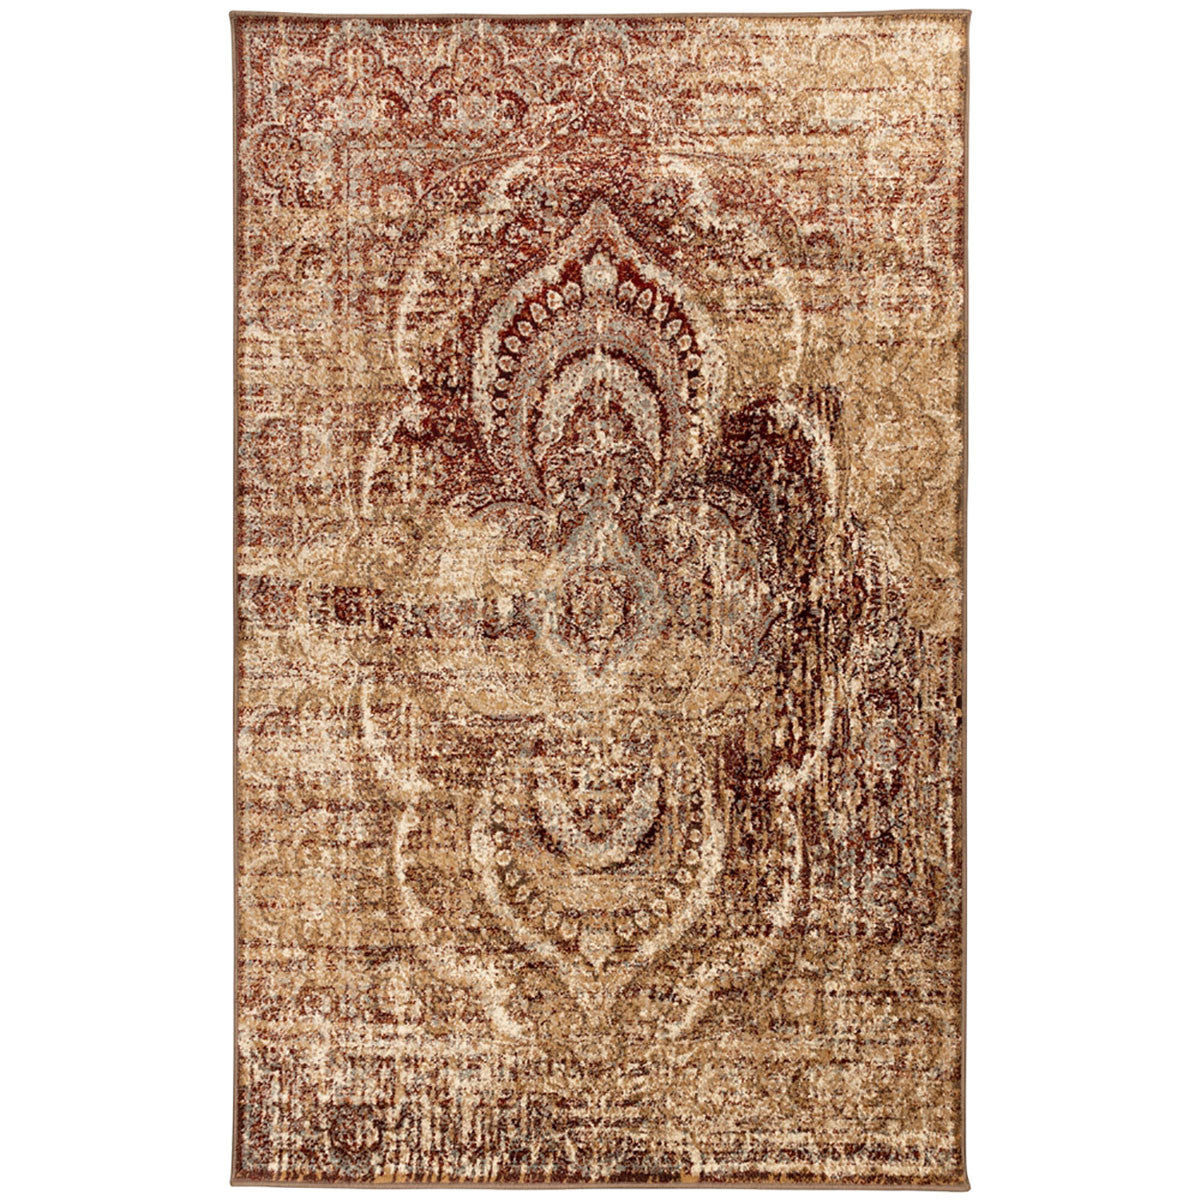 9' X 12' Maroon And Gold Abstract Power Loom Distressed Stain Resistant Area Rug